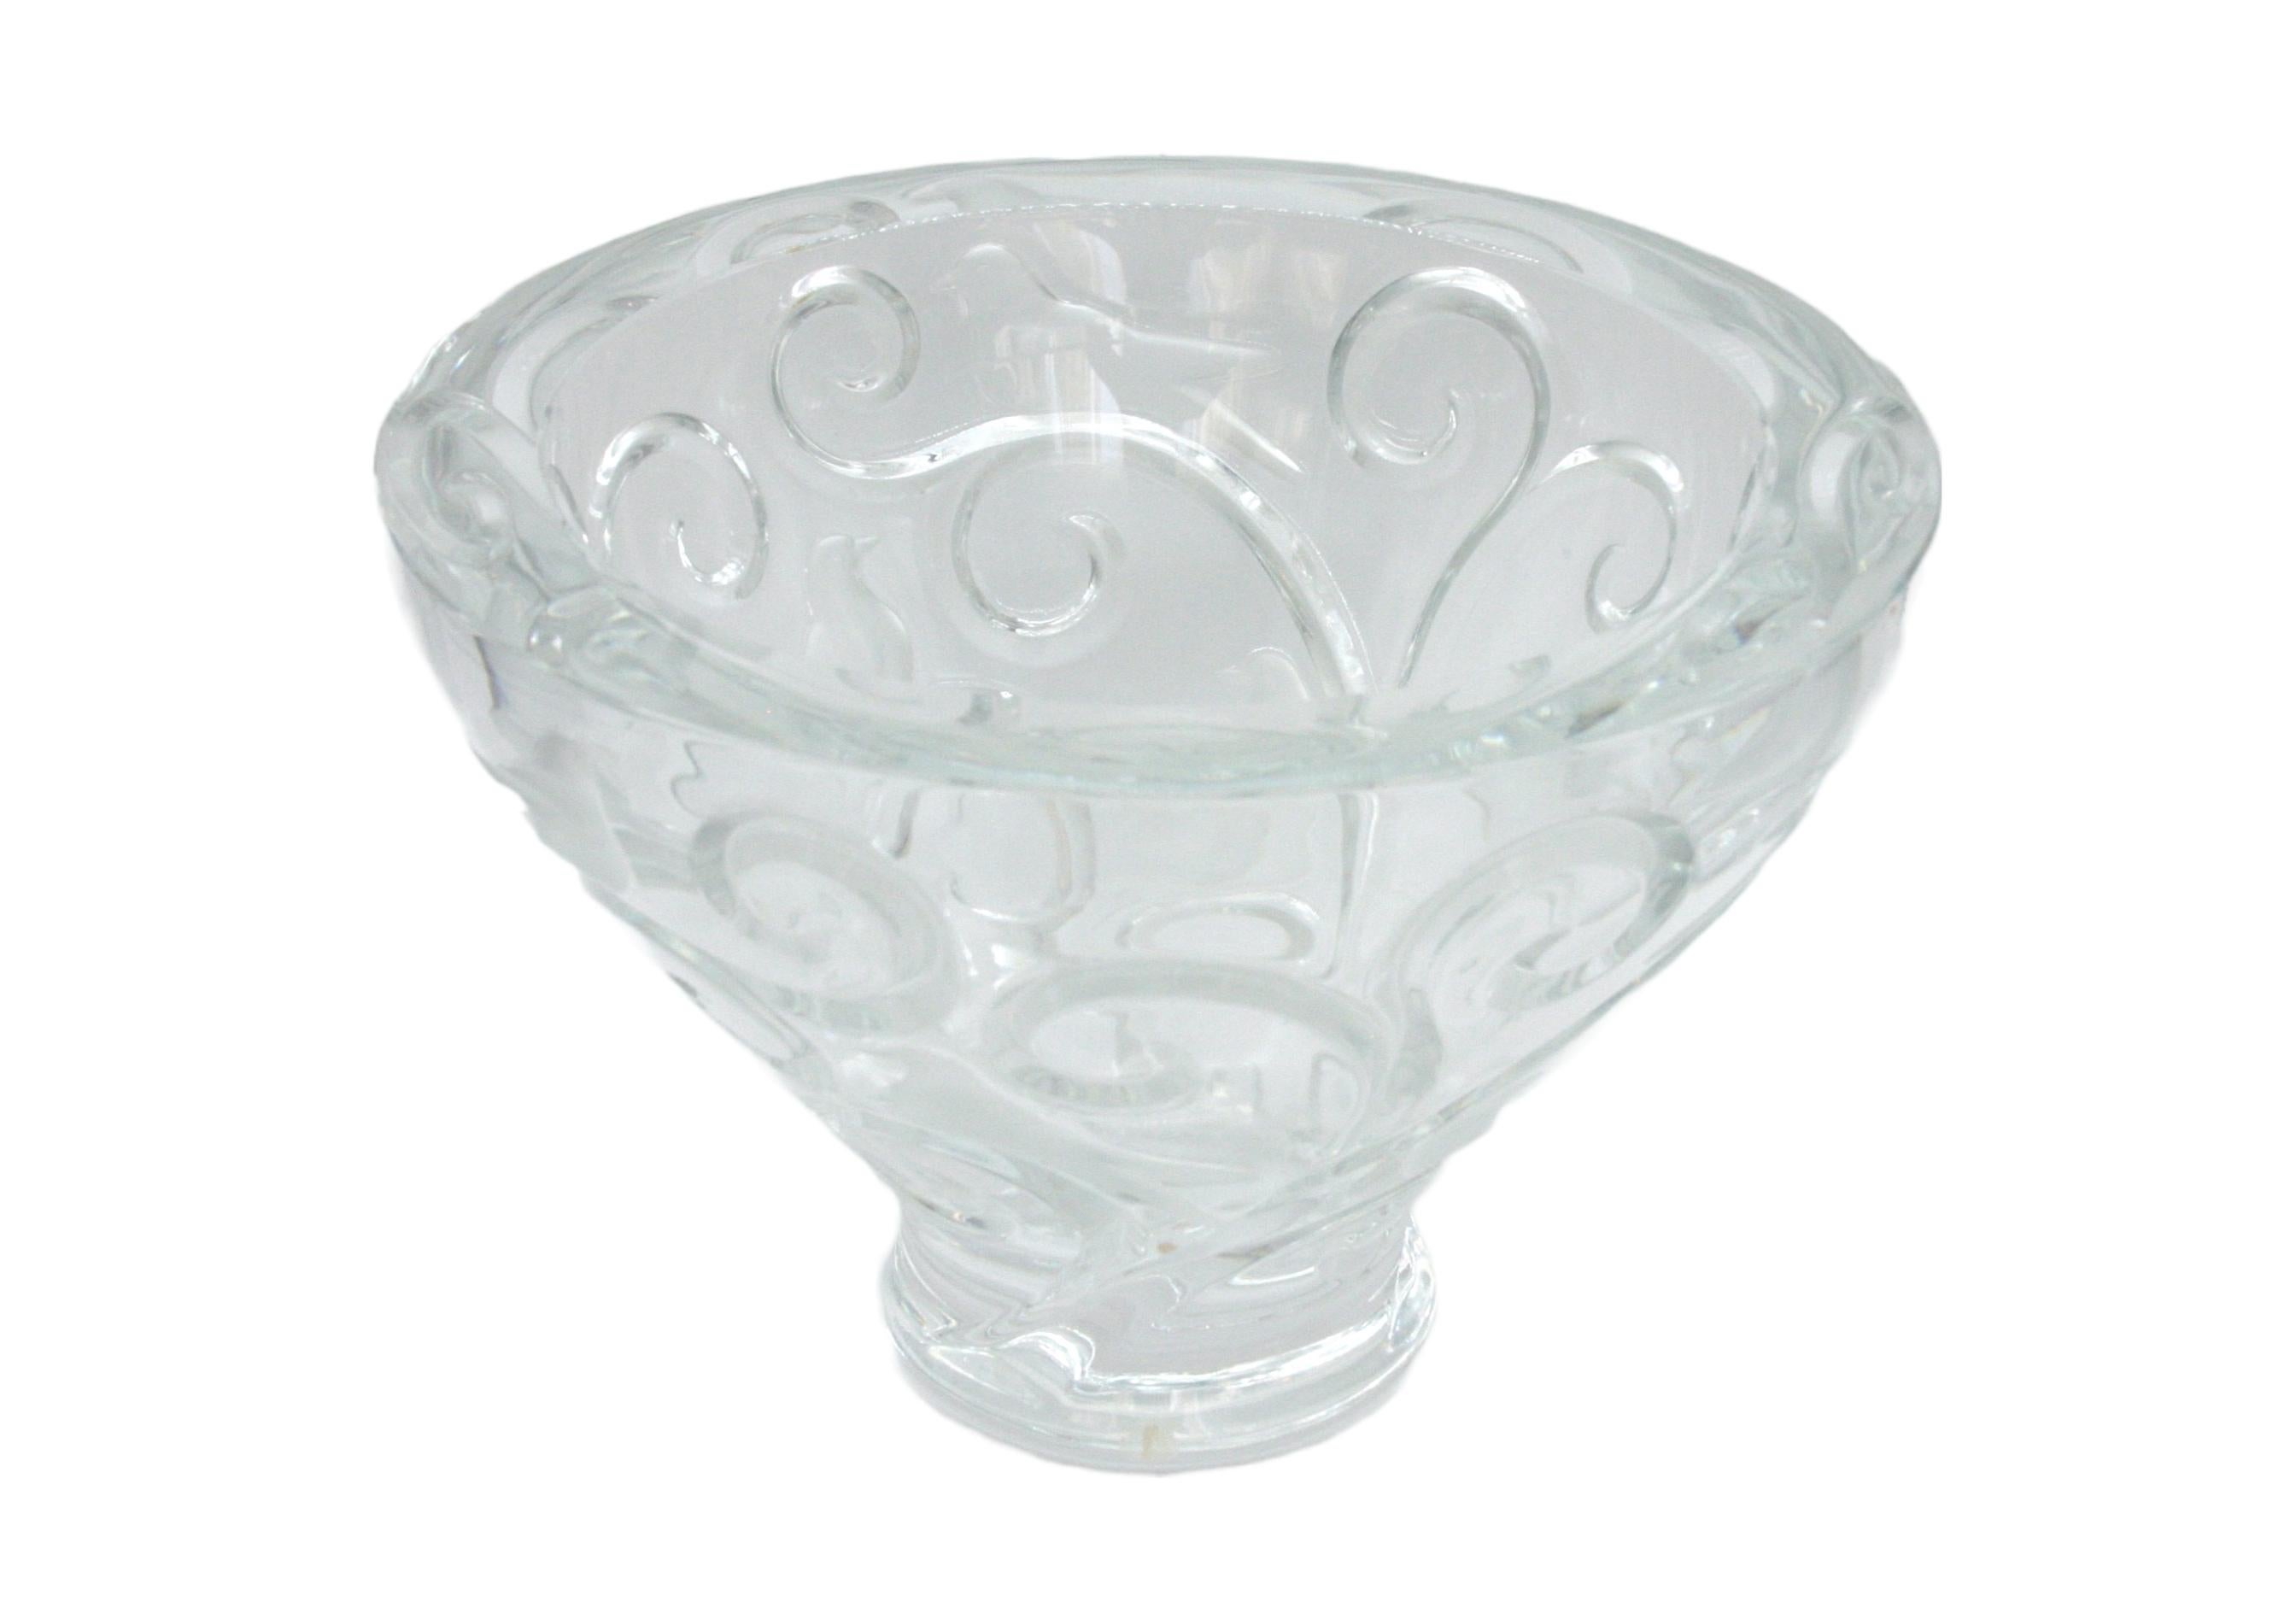 Beautifully hand crafted Lalique centerpiece decorative bowl in a wide open 